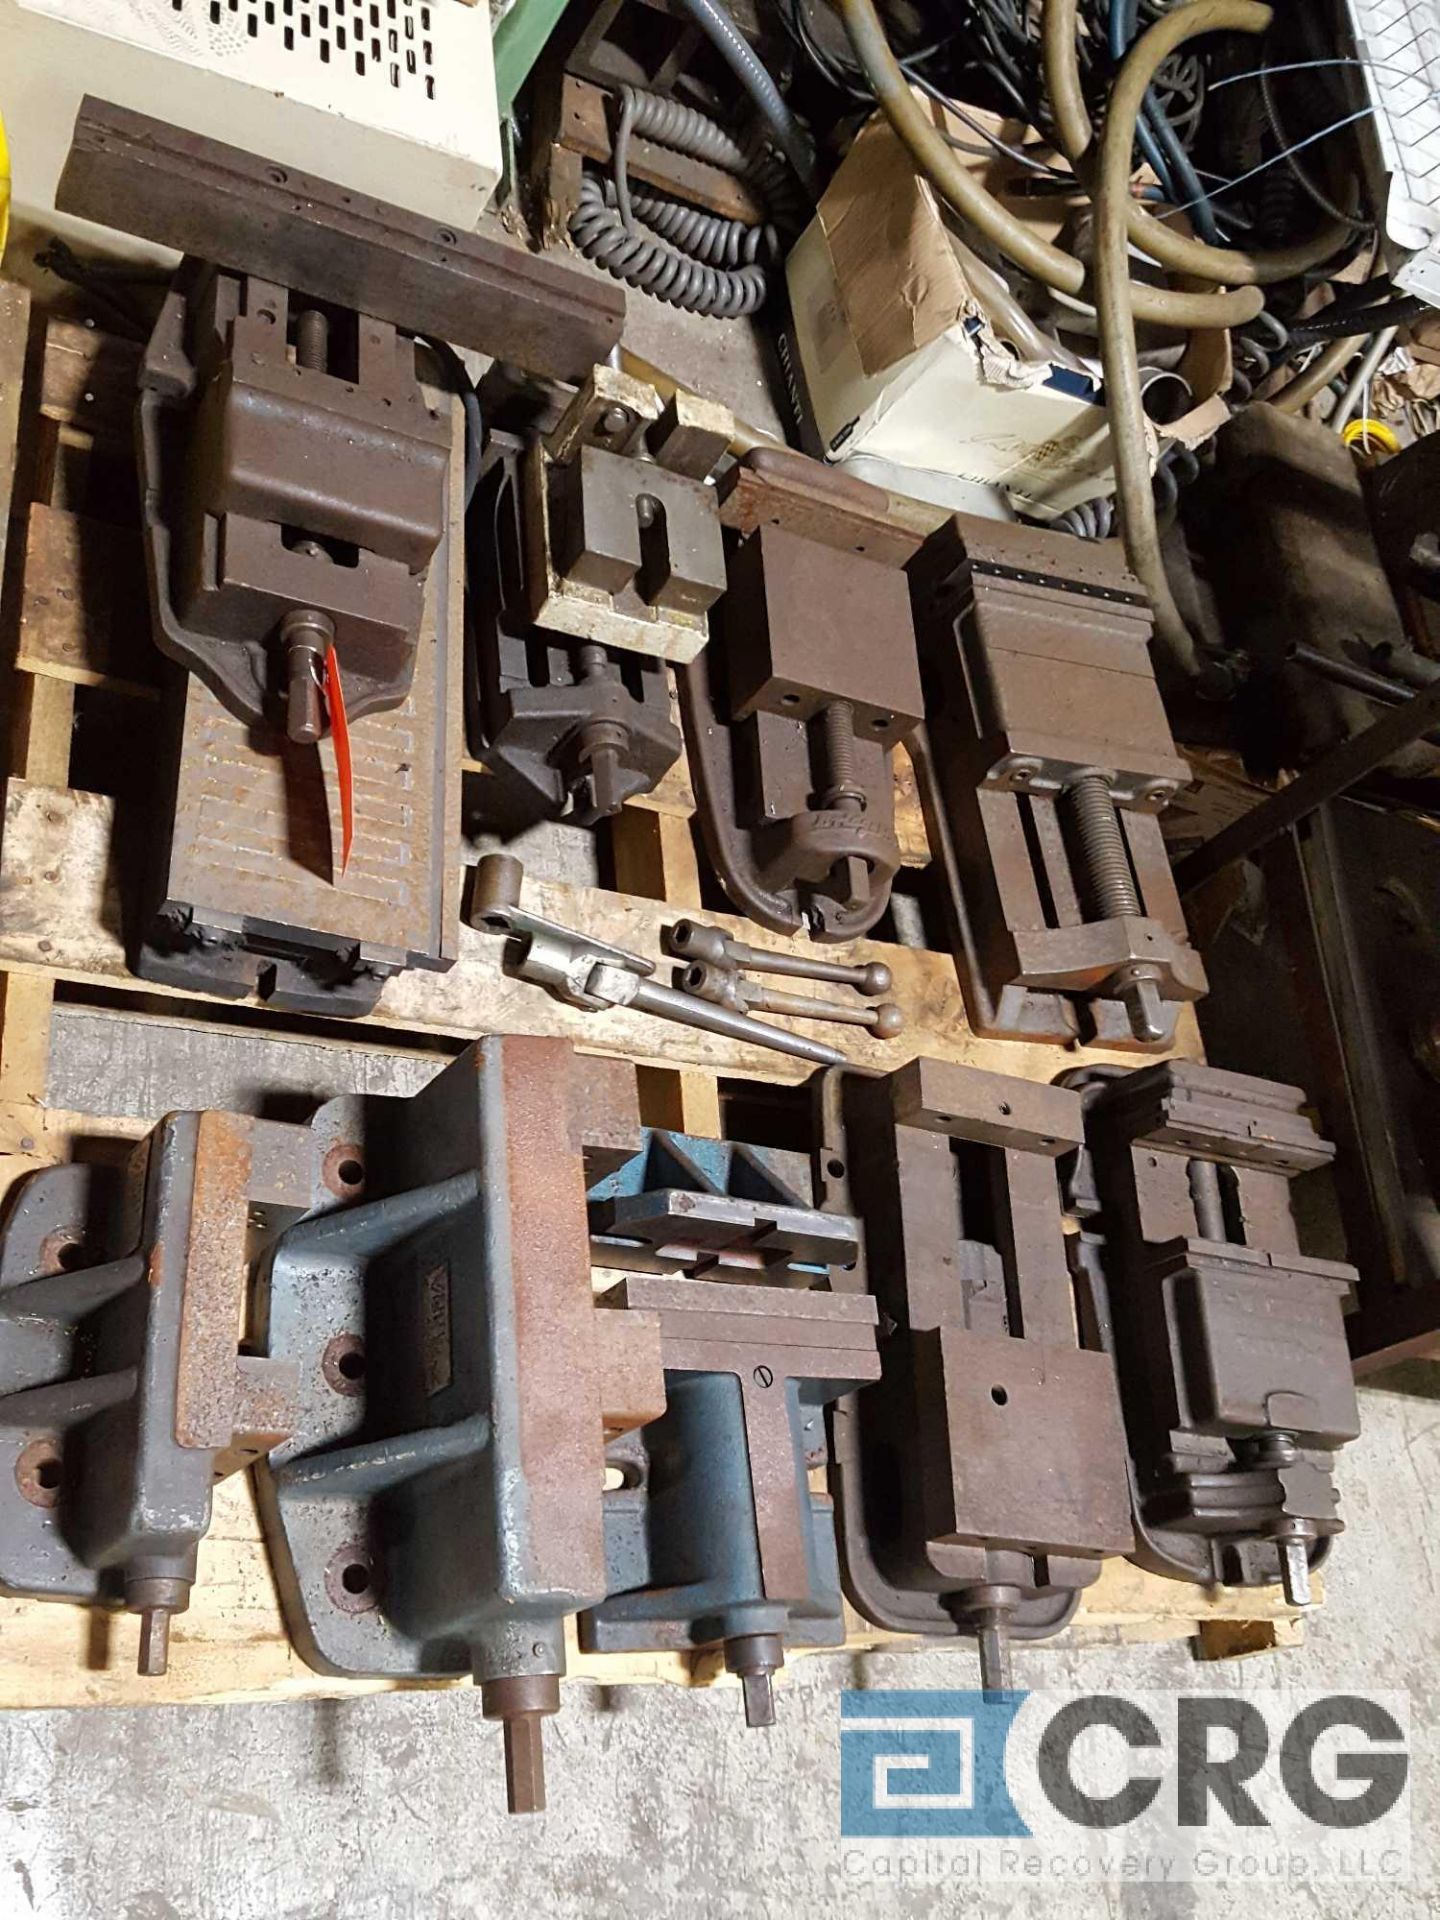 Lot of assorted machinists vises and (1) magnetic chuck.